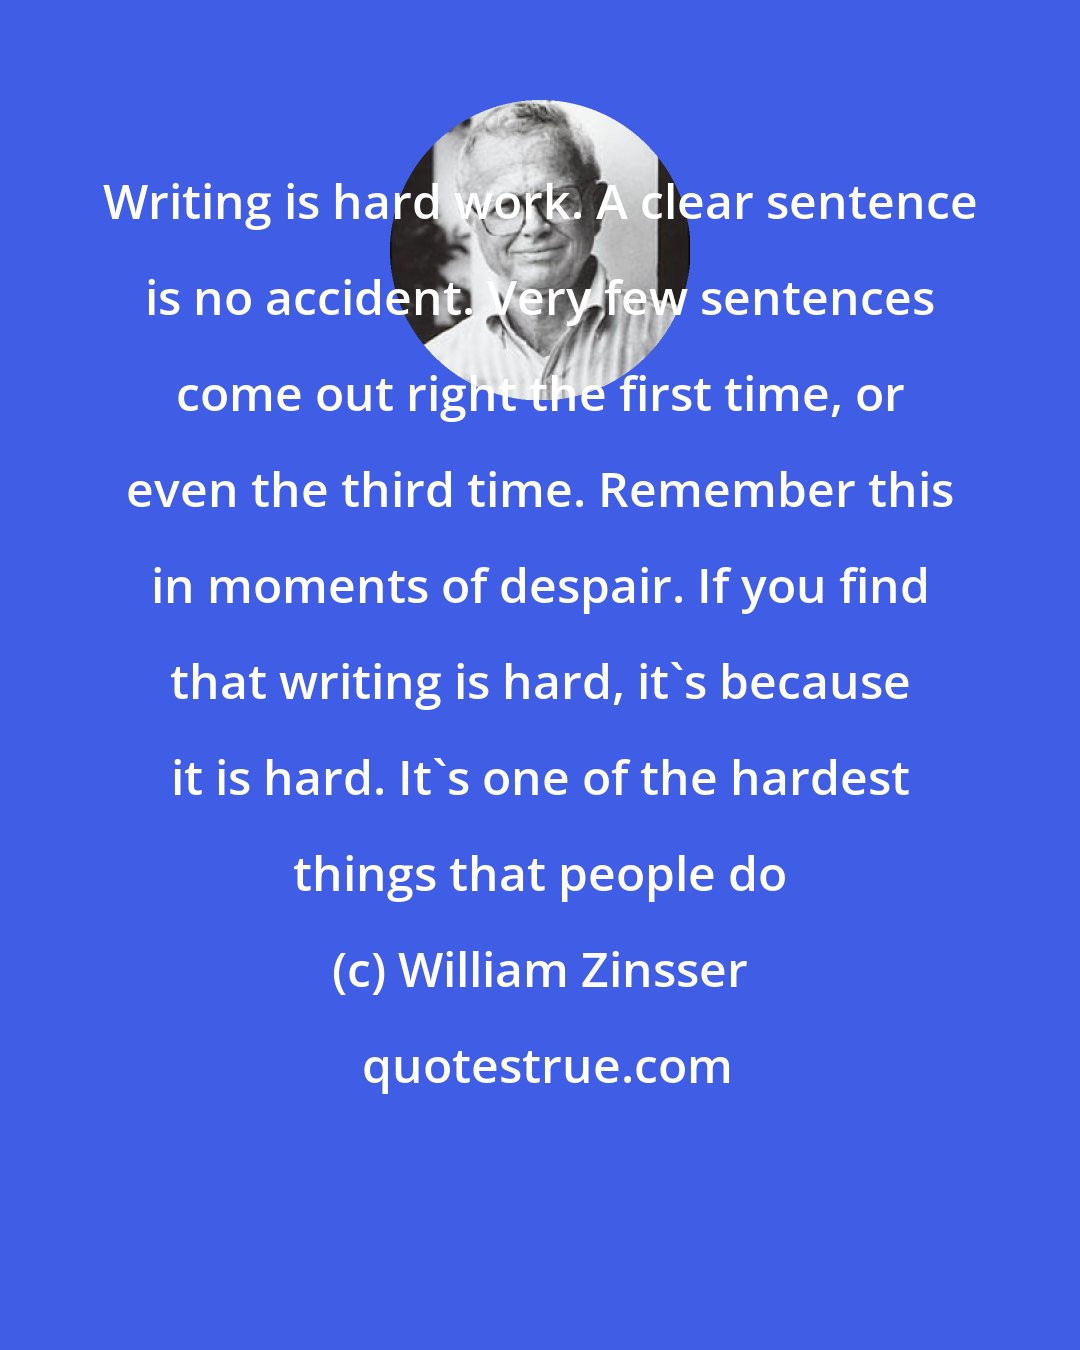 William Zinsser: Writing is hard work. A clear sentence is no accident. Very few sentences come out right the first time, or even the third time. Remember this in moments of despair. If you find that writing is hard, it's because it is hard. It's one of the hardest things that people do